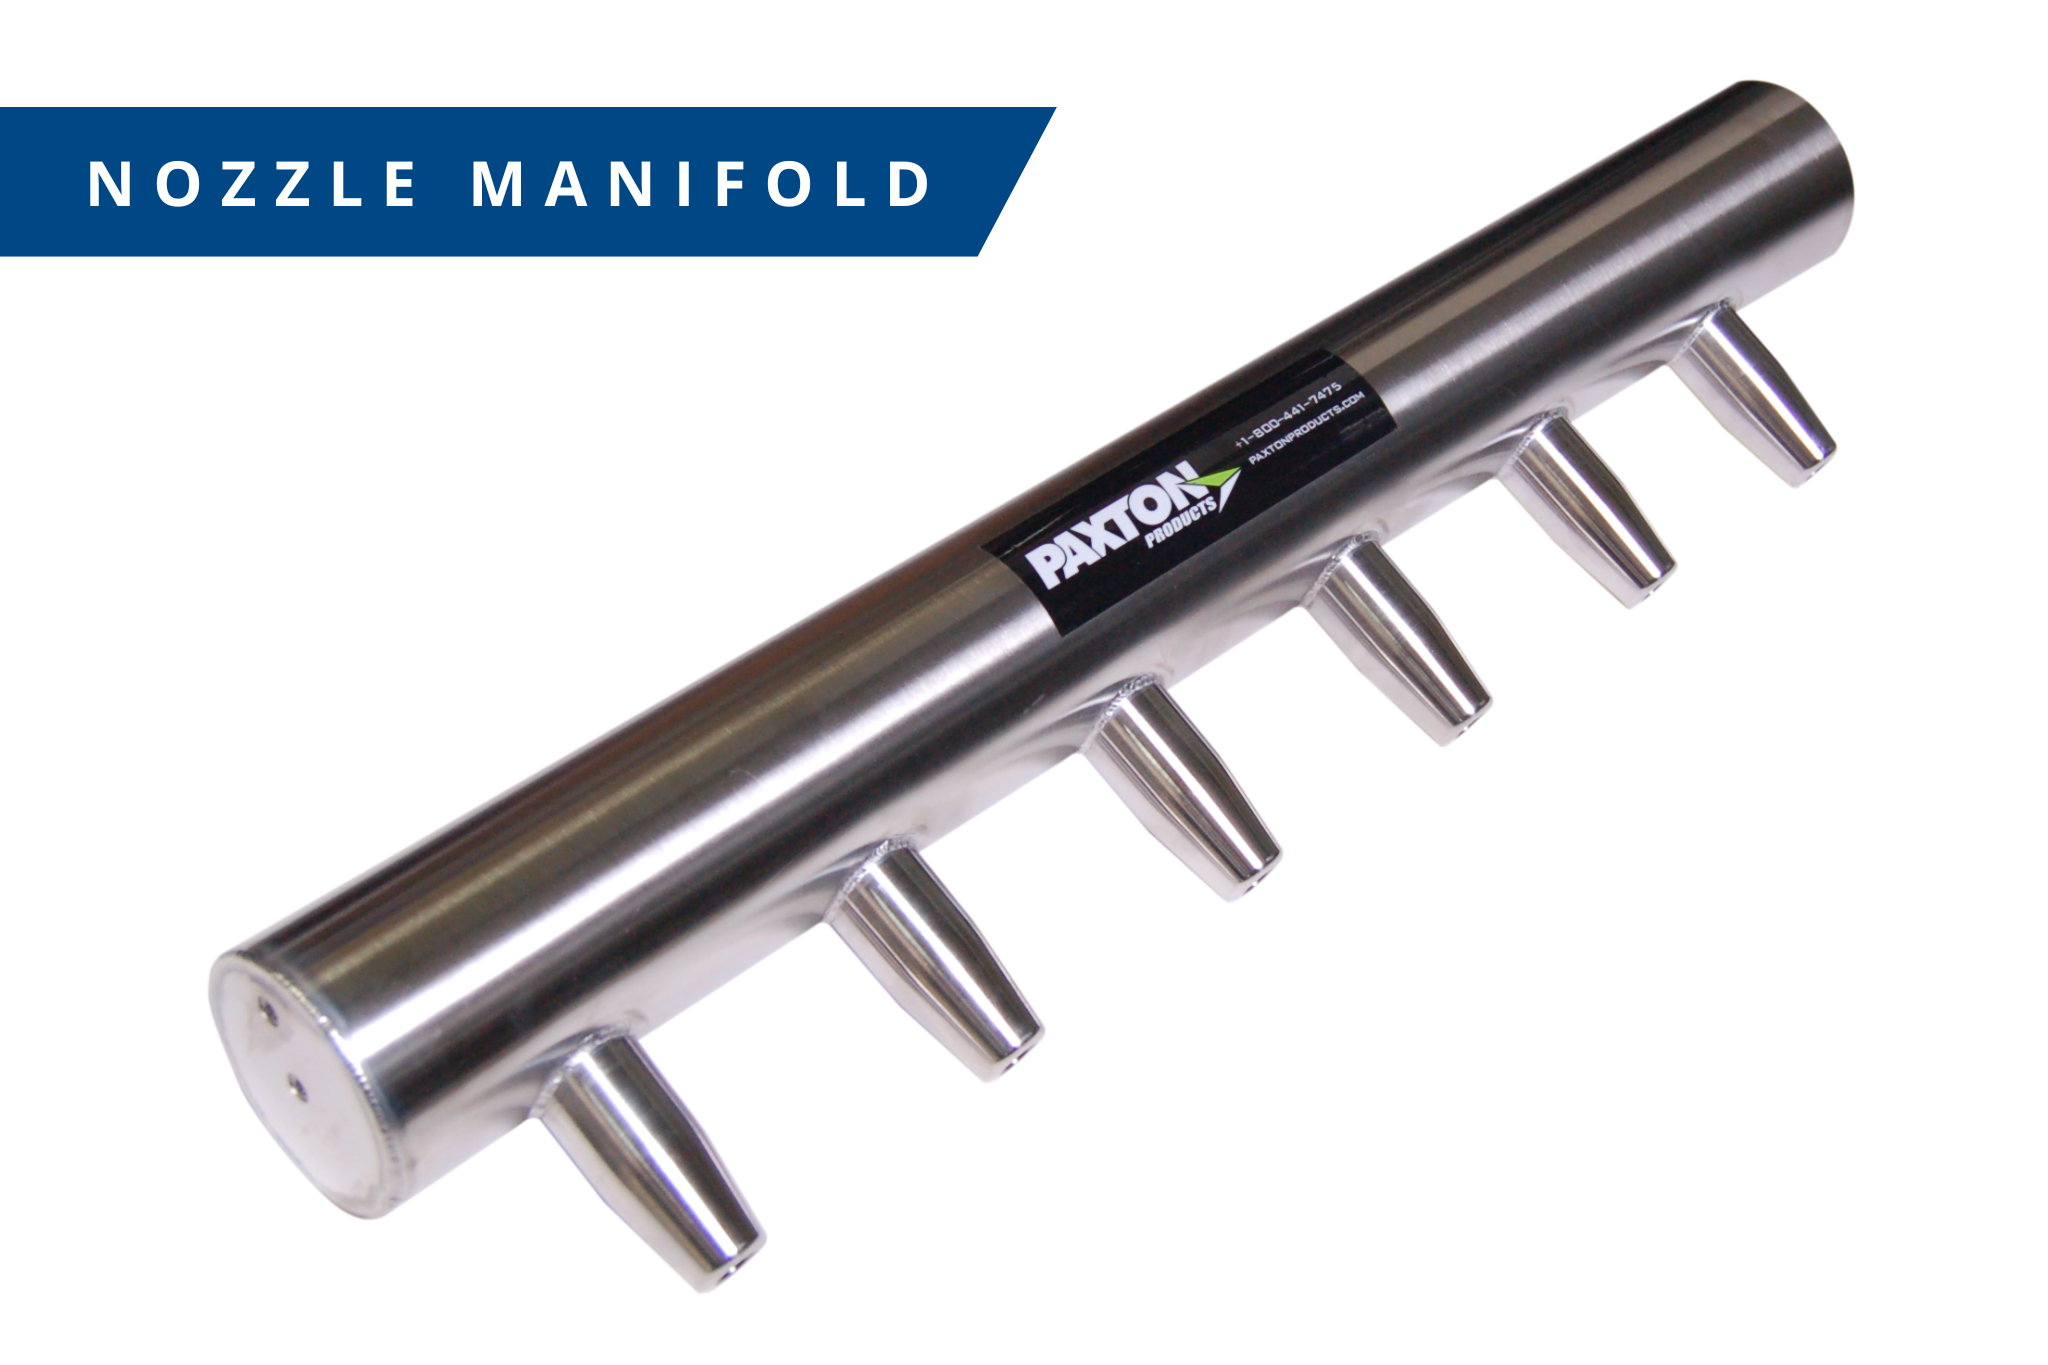 High Efficiency Nozzle Manifold by Paxton Products